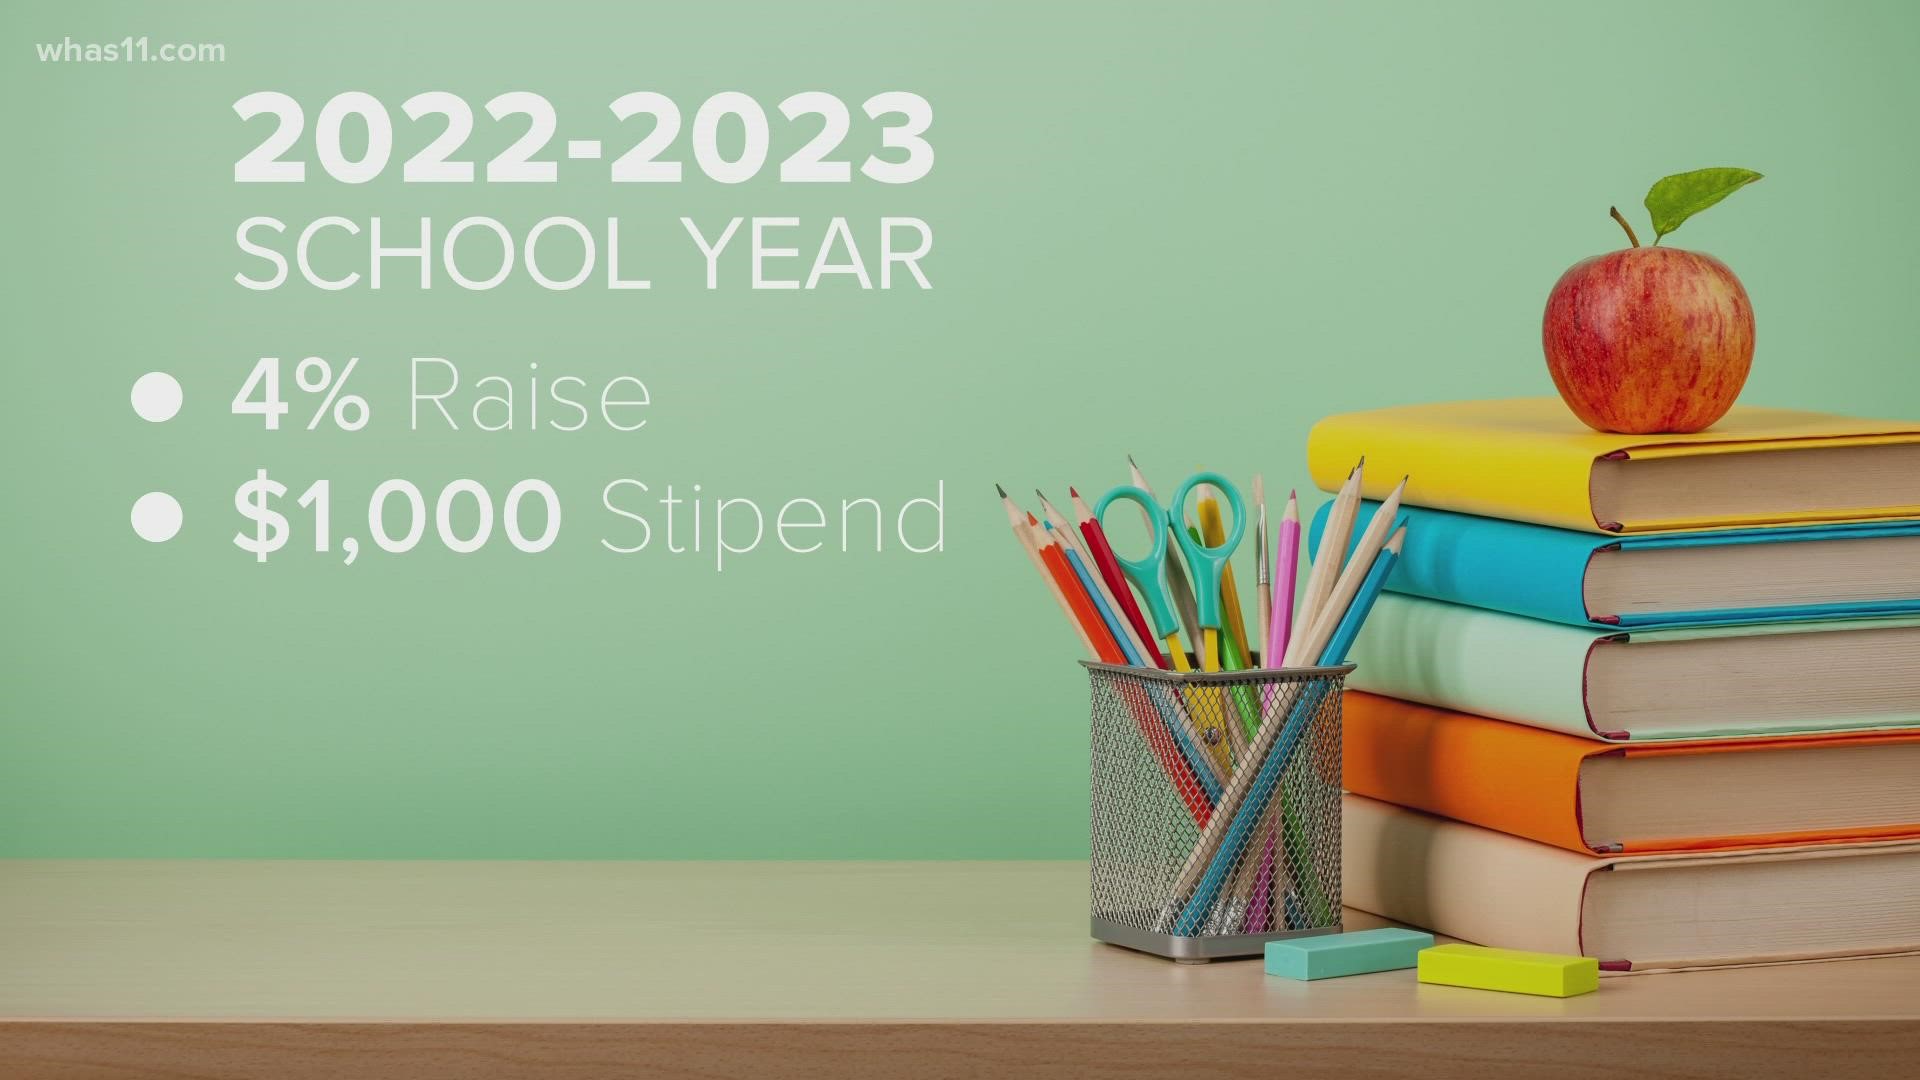 Jefferson County Public School Superintendent Dr. Marty Pollio said the raise is the largest raise percentage-wise the district has given to staff in 15 years.